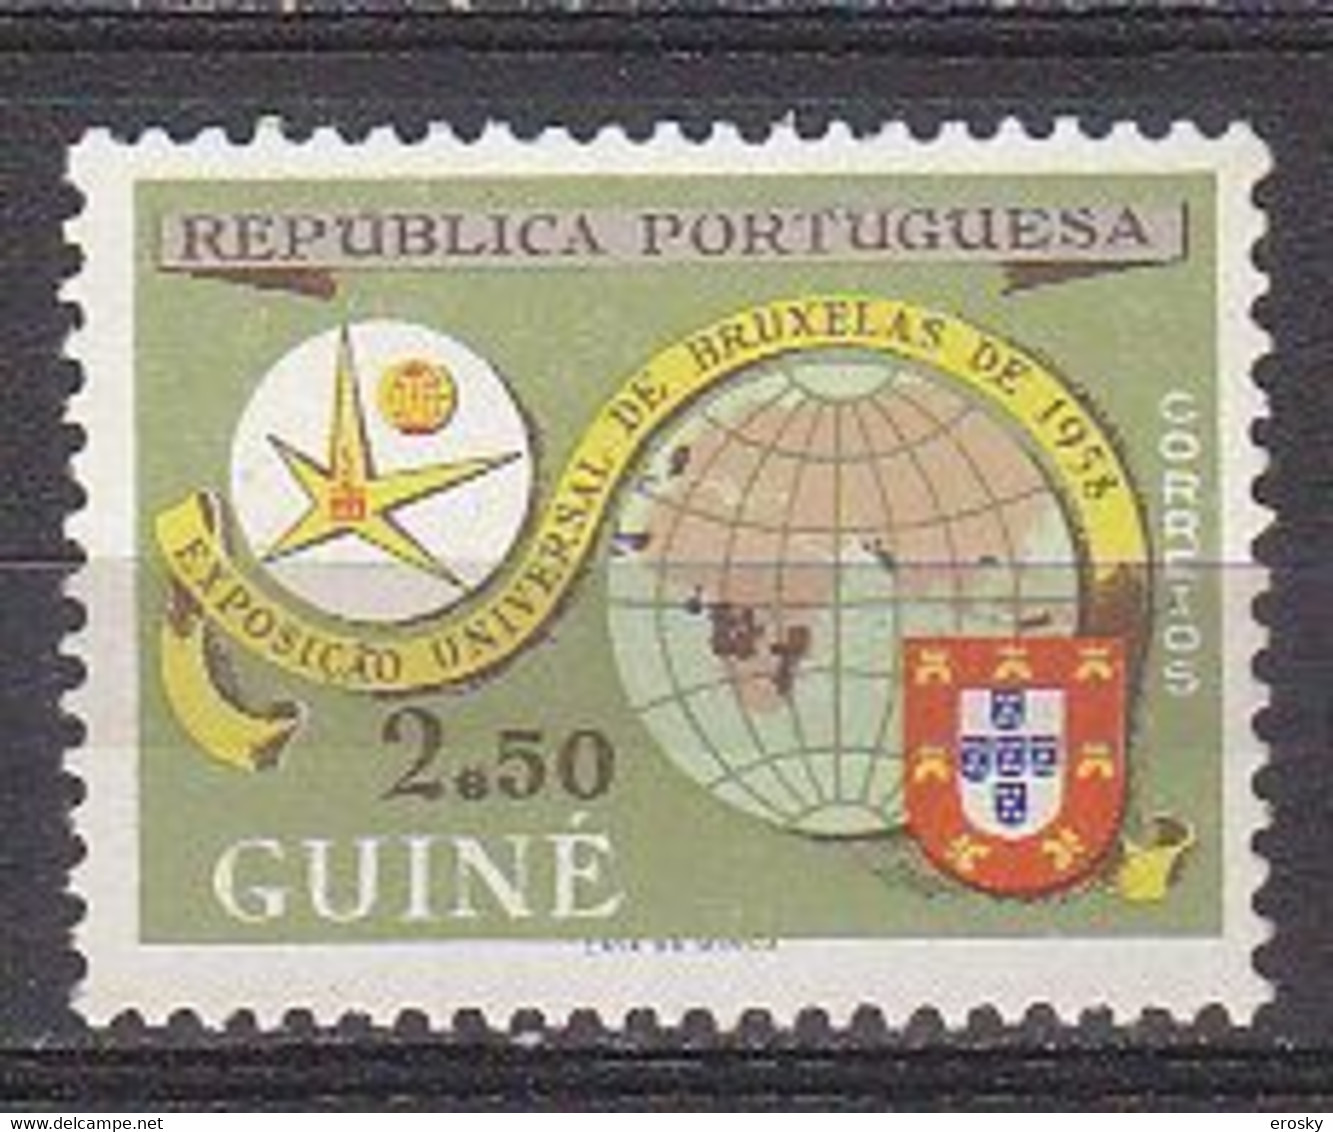 A1644 - COLONIES PORTUGAISES GUINEA Yv N°294 ** EXPO BRUXELLES - Portugees Guinea